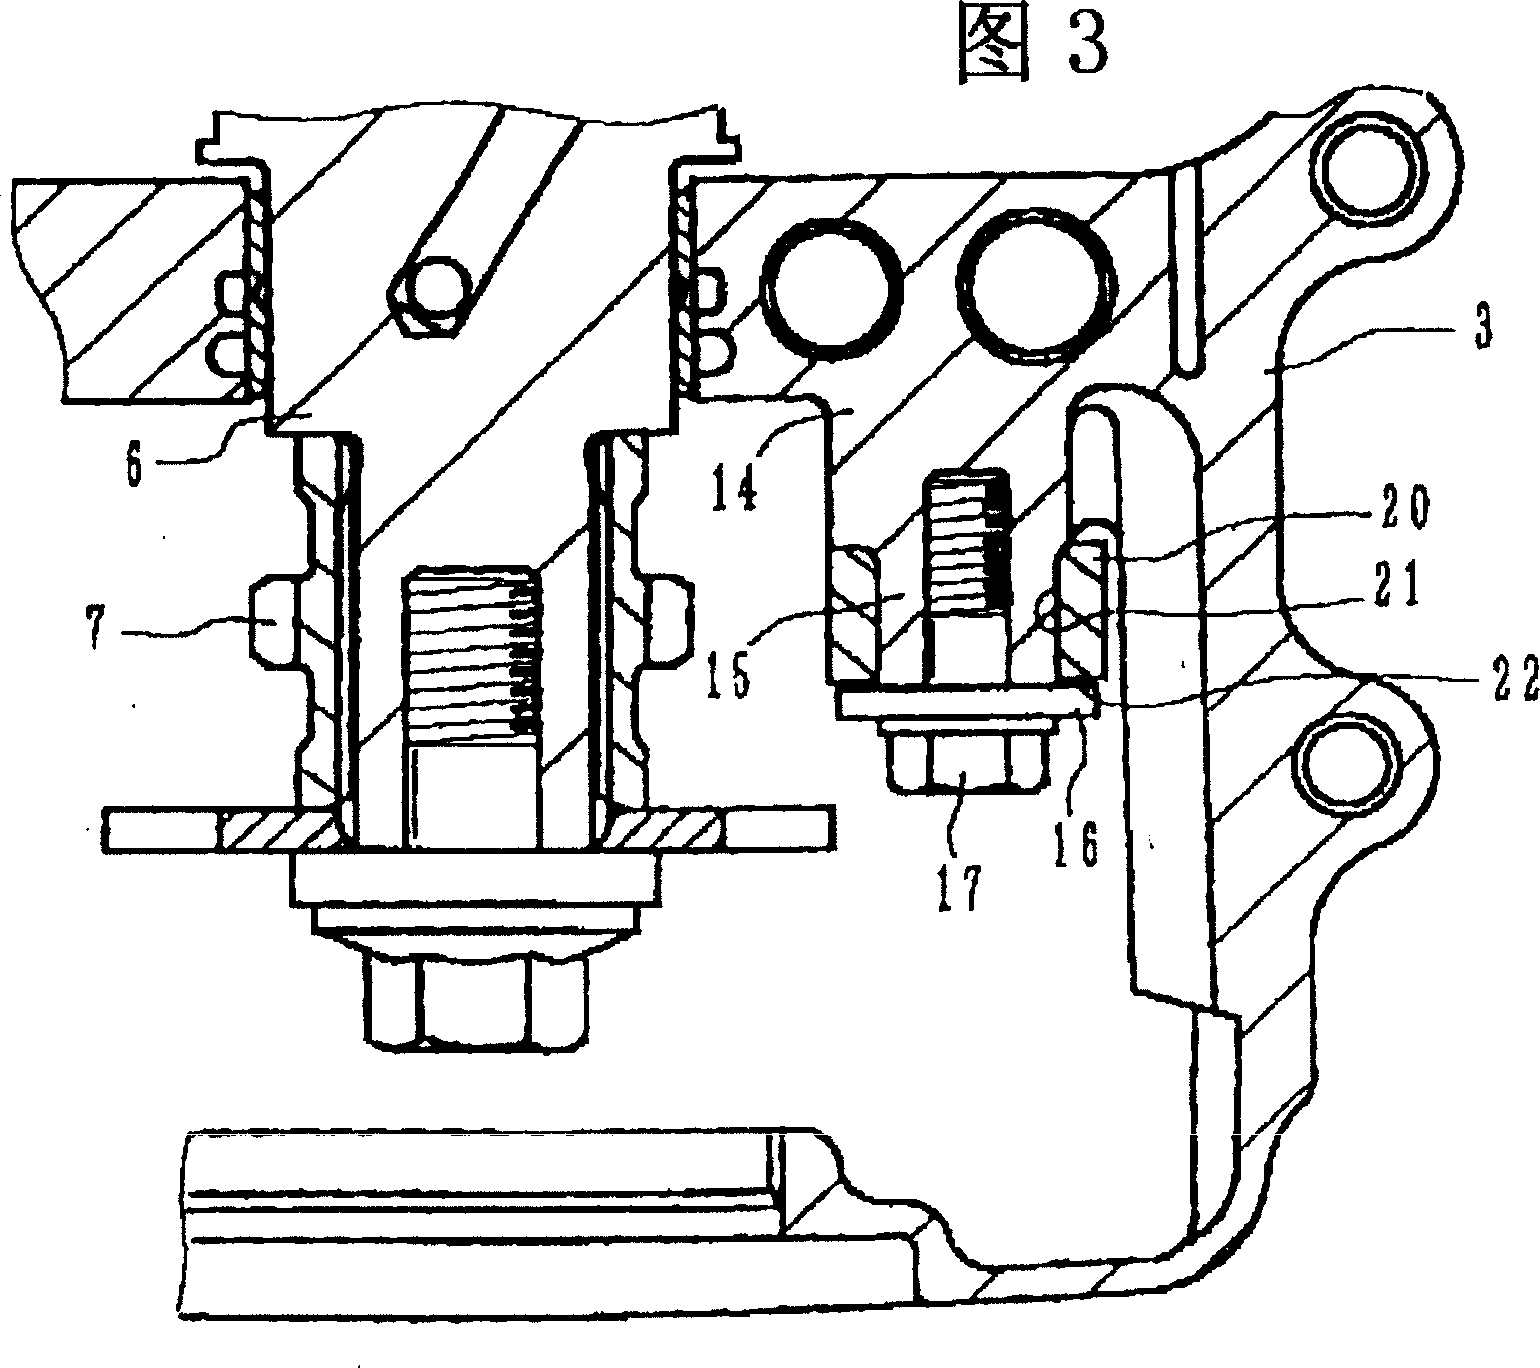 Installation structure of cam chain guide apparatus